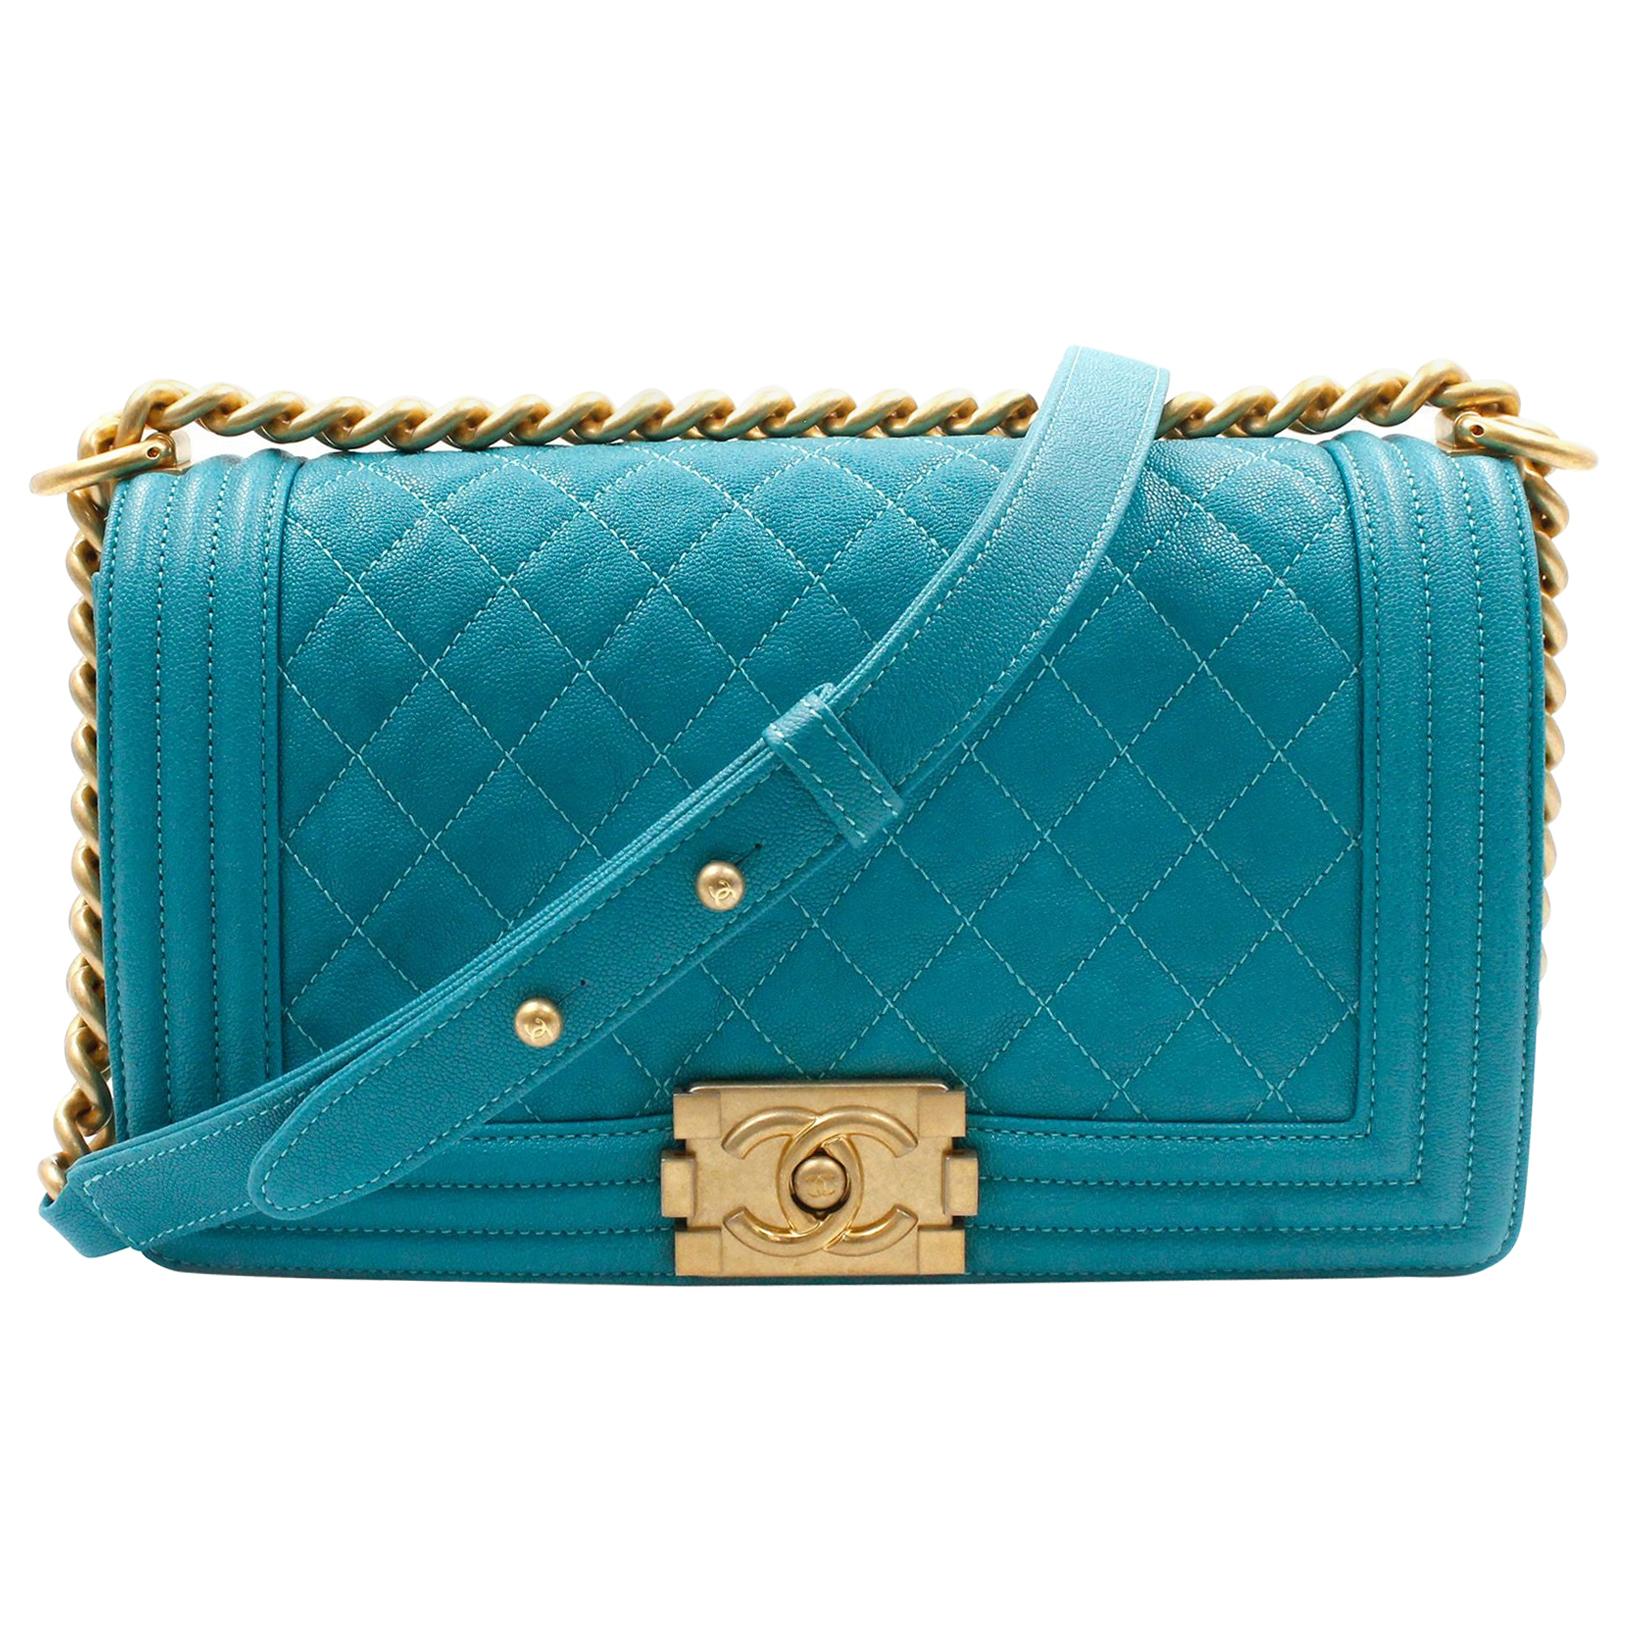 Chanel Medium Teal Turquoise Quilted Caviar Calf Skin Gold Tone Boy Bag A67086